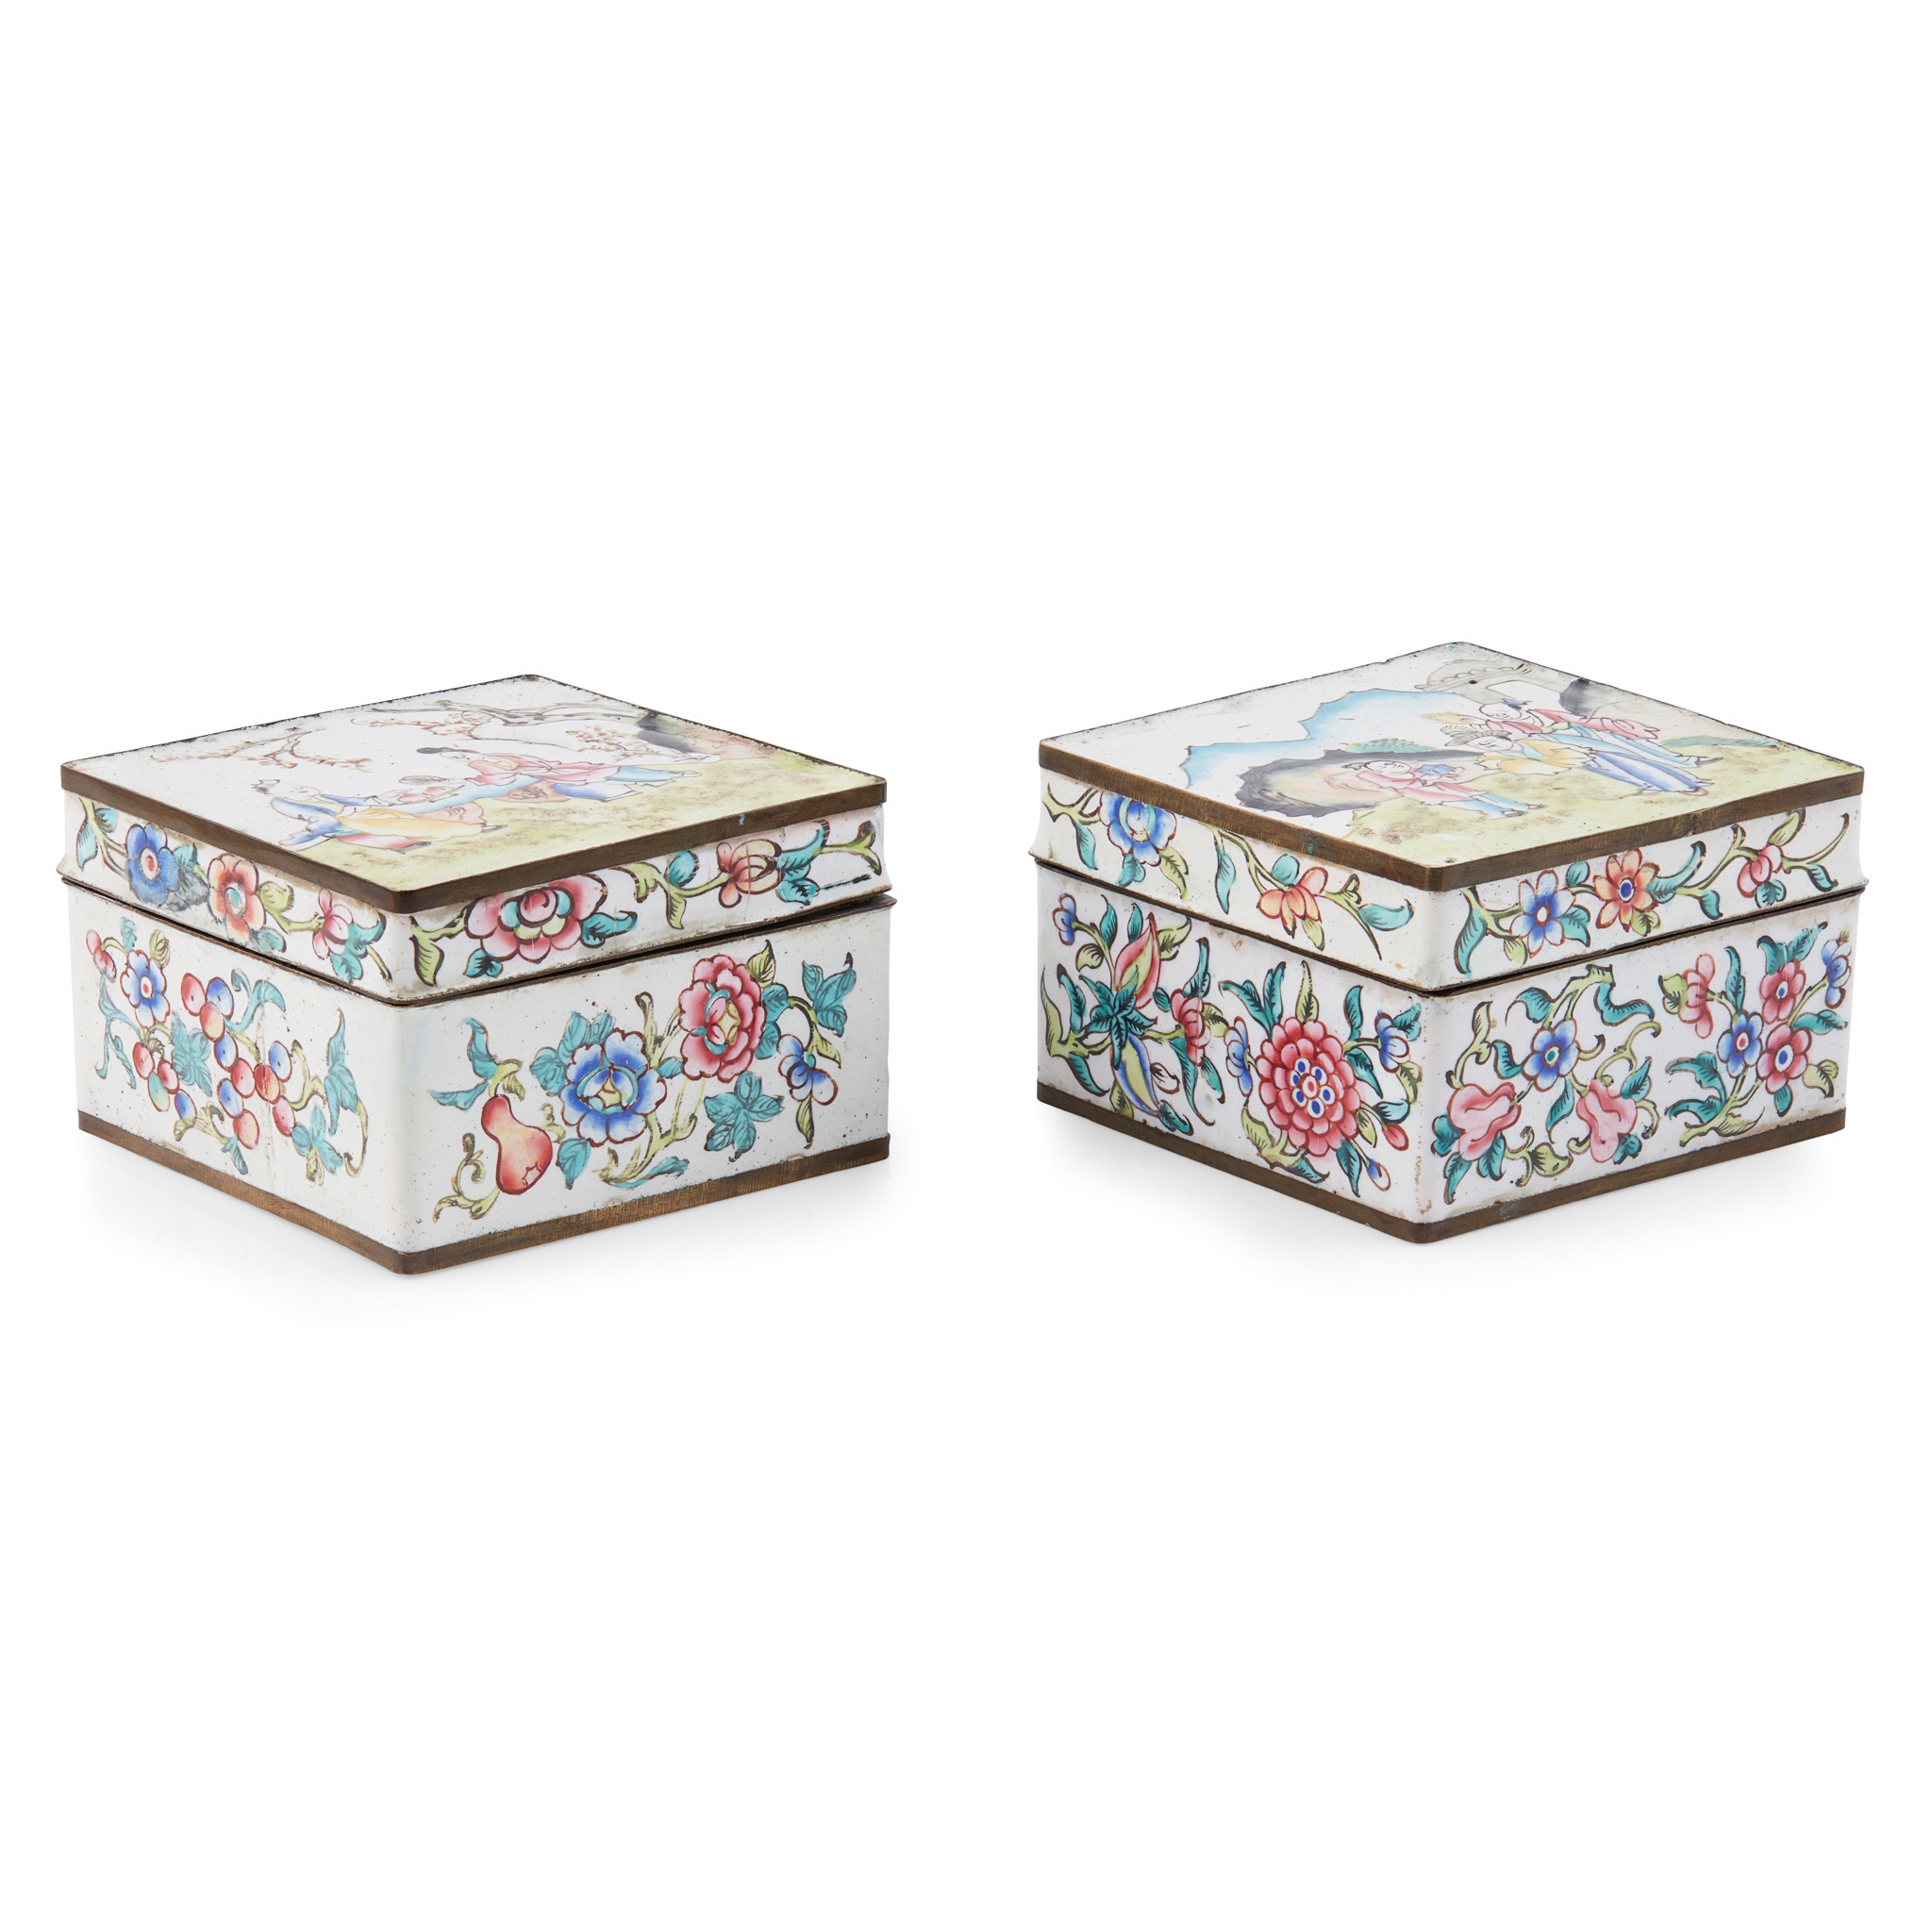 Lot 58 - PAIR OF PAINTED ENAMEL SQUARE BOXES